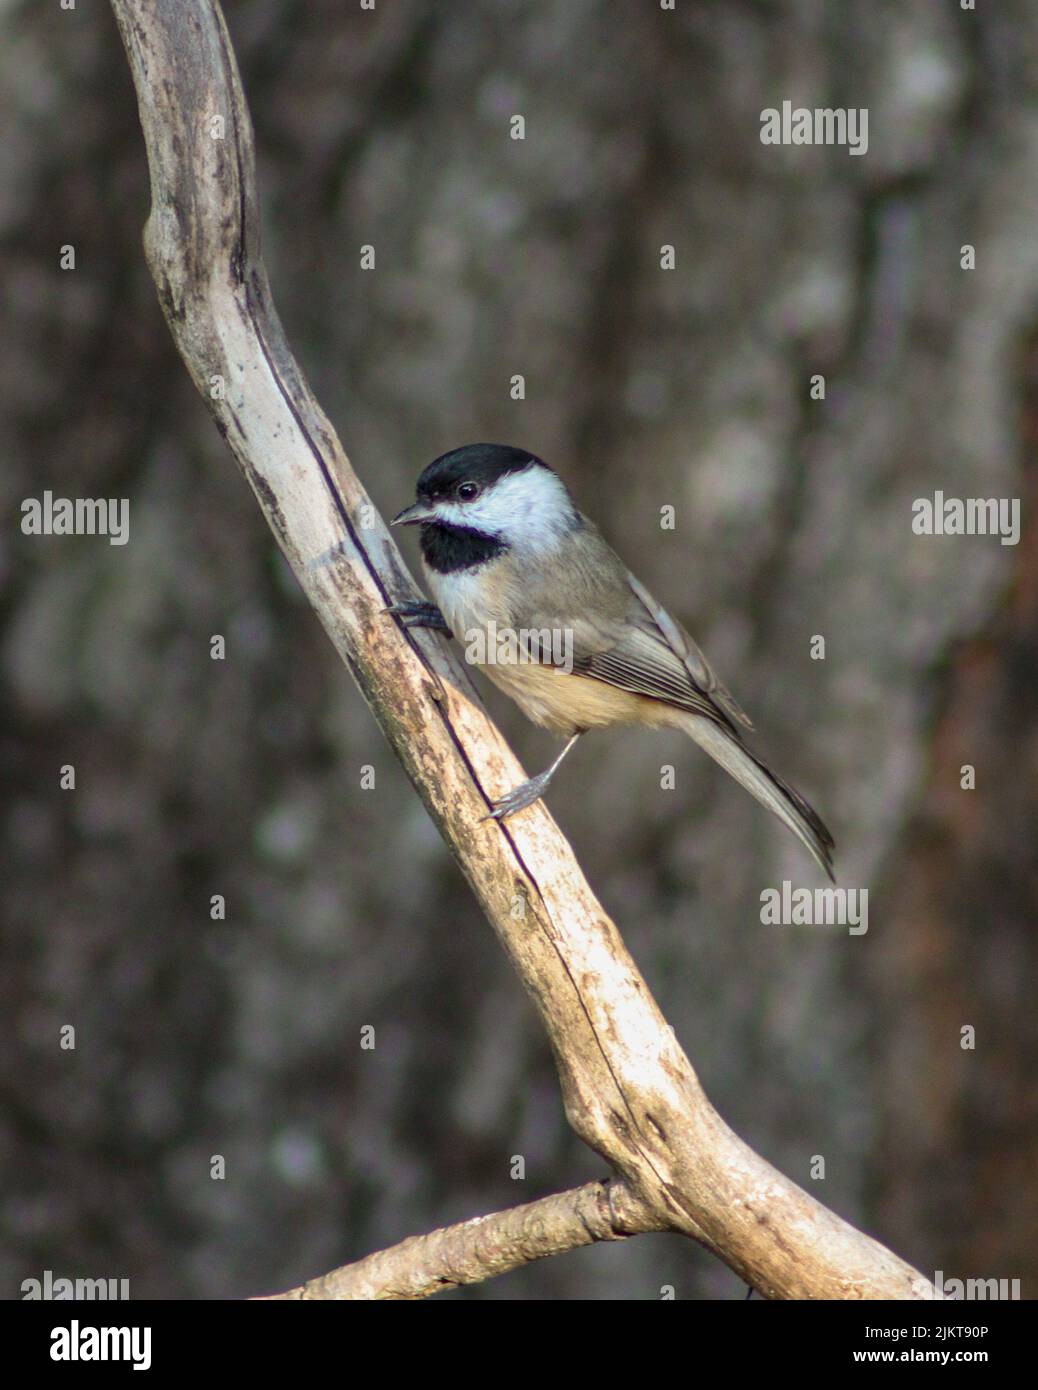 A vertical closeup of the black-capped chickadee, Poecile atricapillus on the branch. Shallow focus. Stock Photo